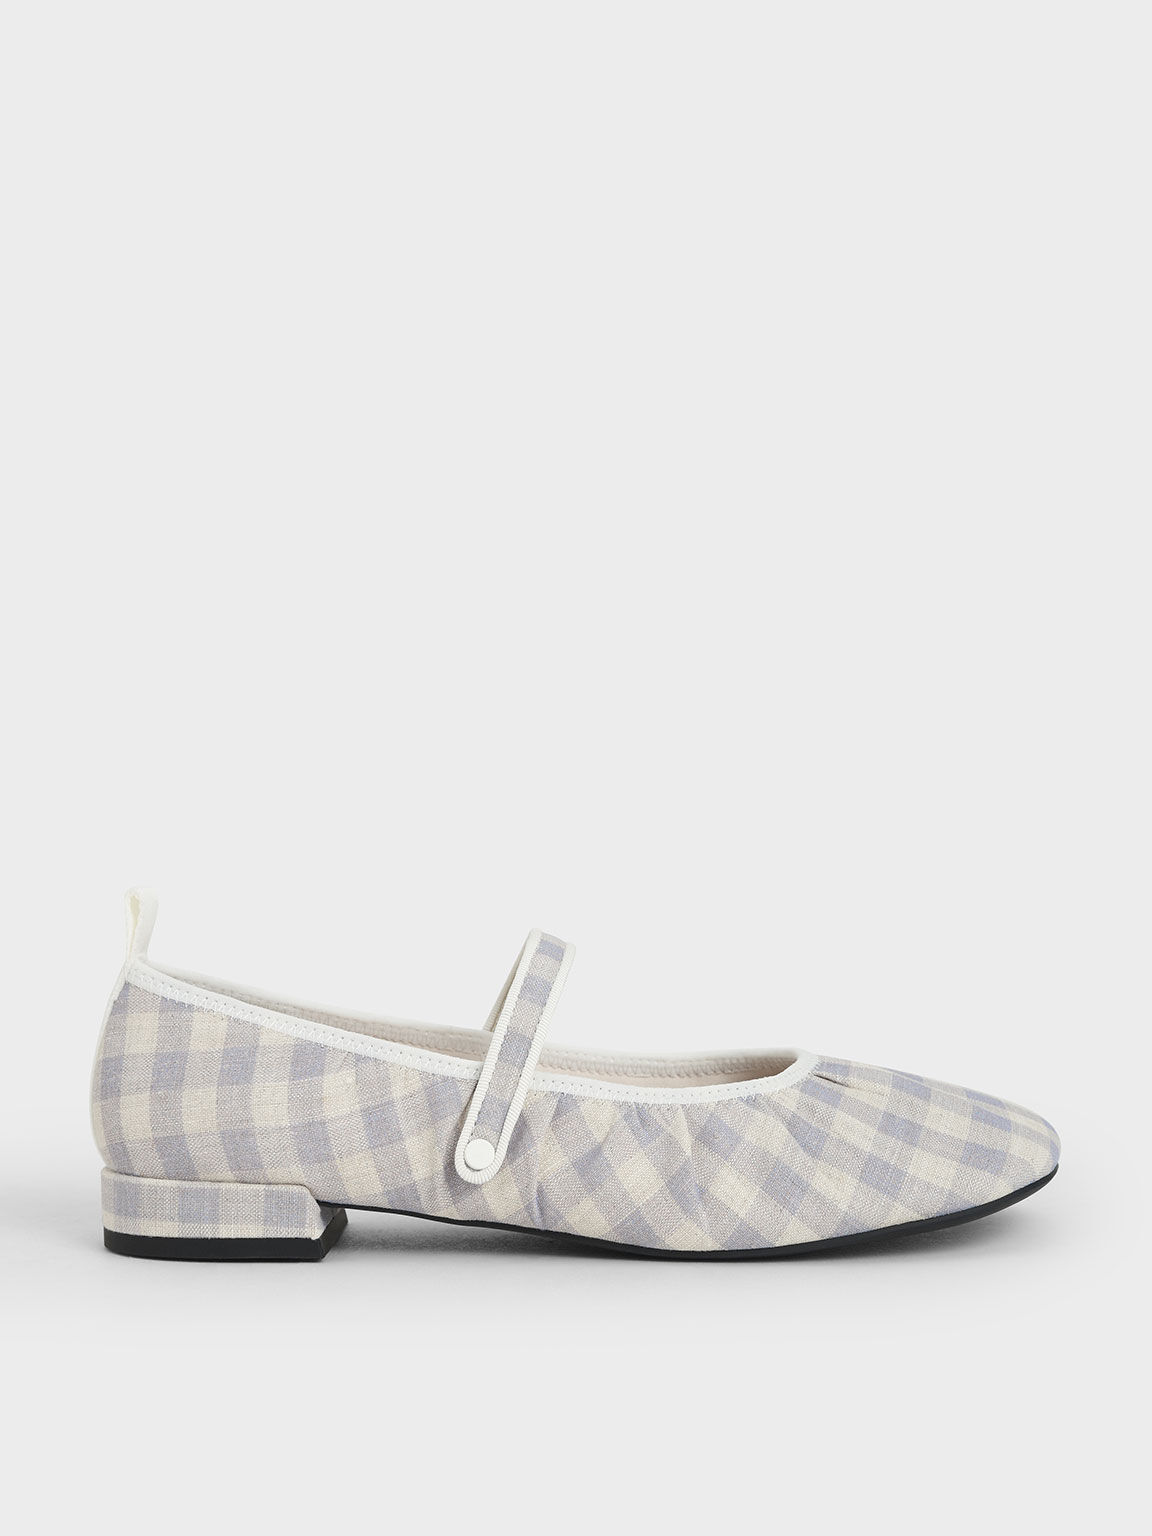 Gingham Mary Janes, Lilac Grey, hi-res